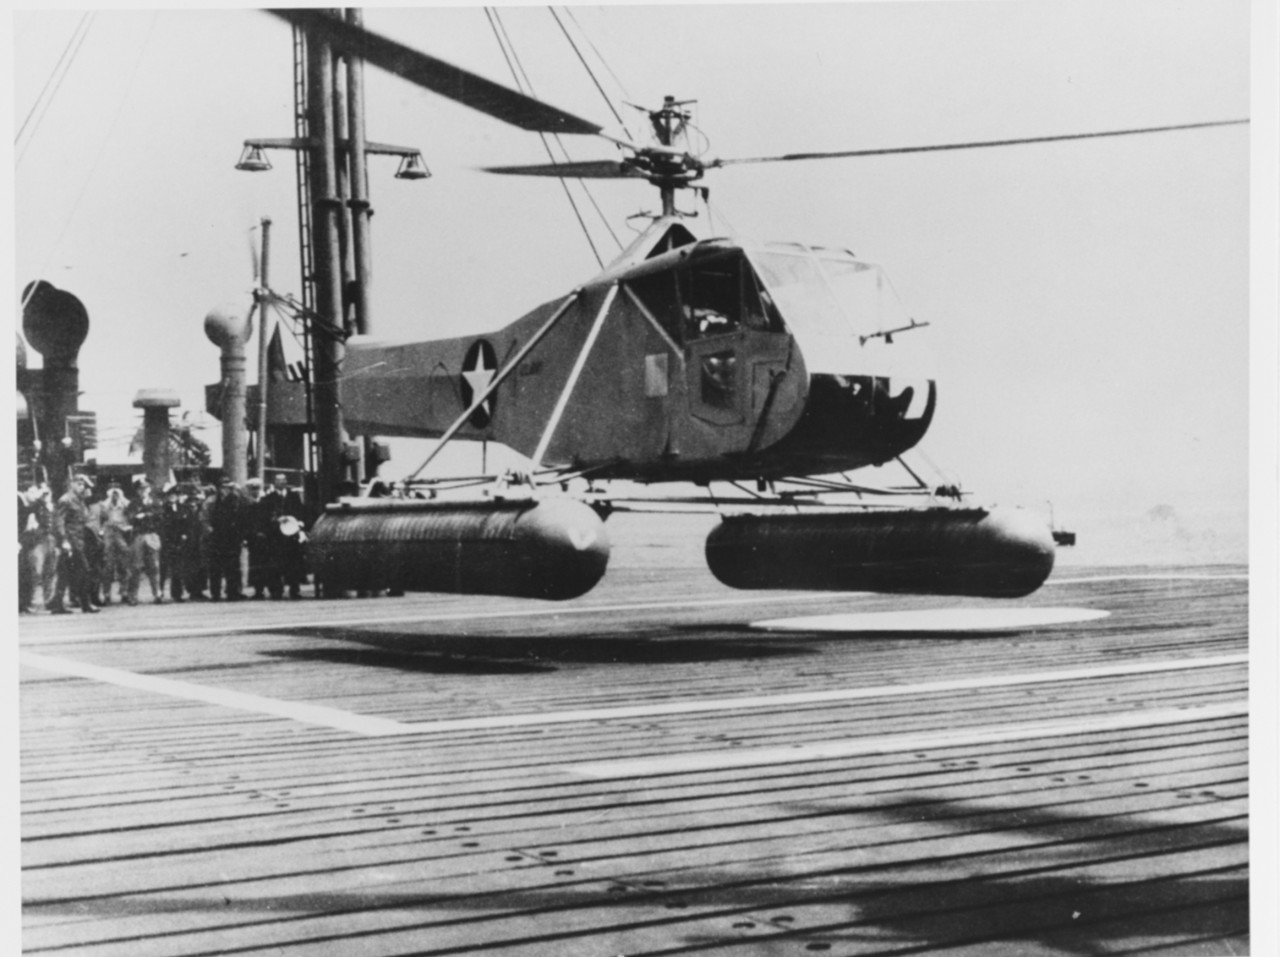 A USAAC/Sikorsky R-4 Helicopter